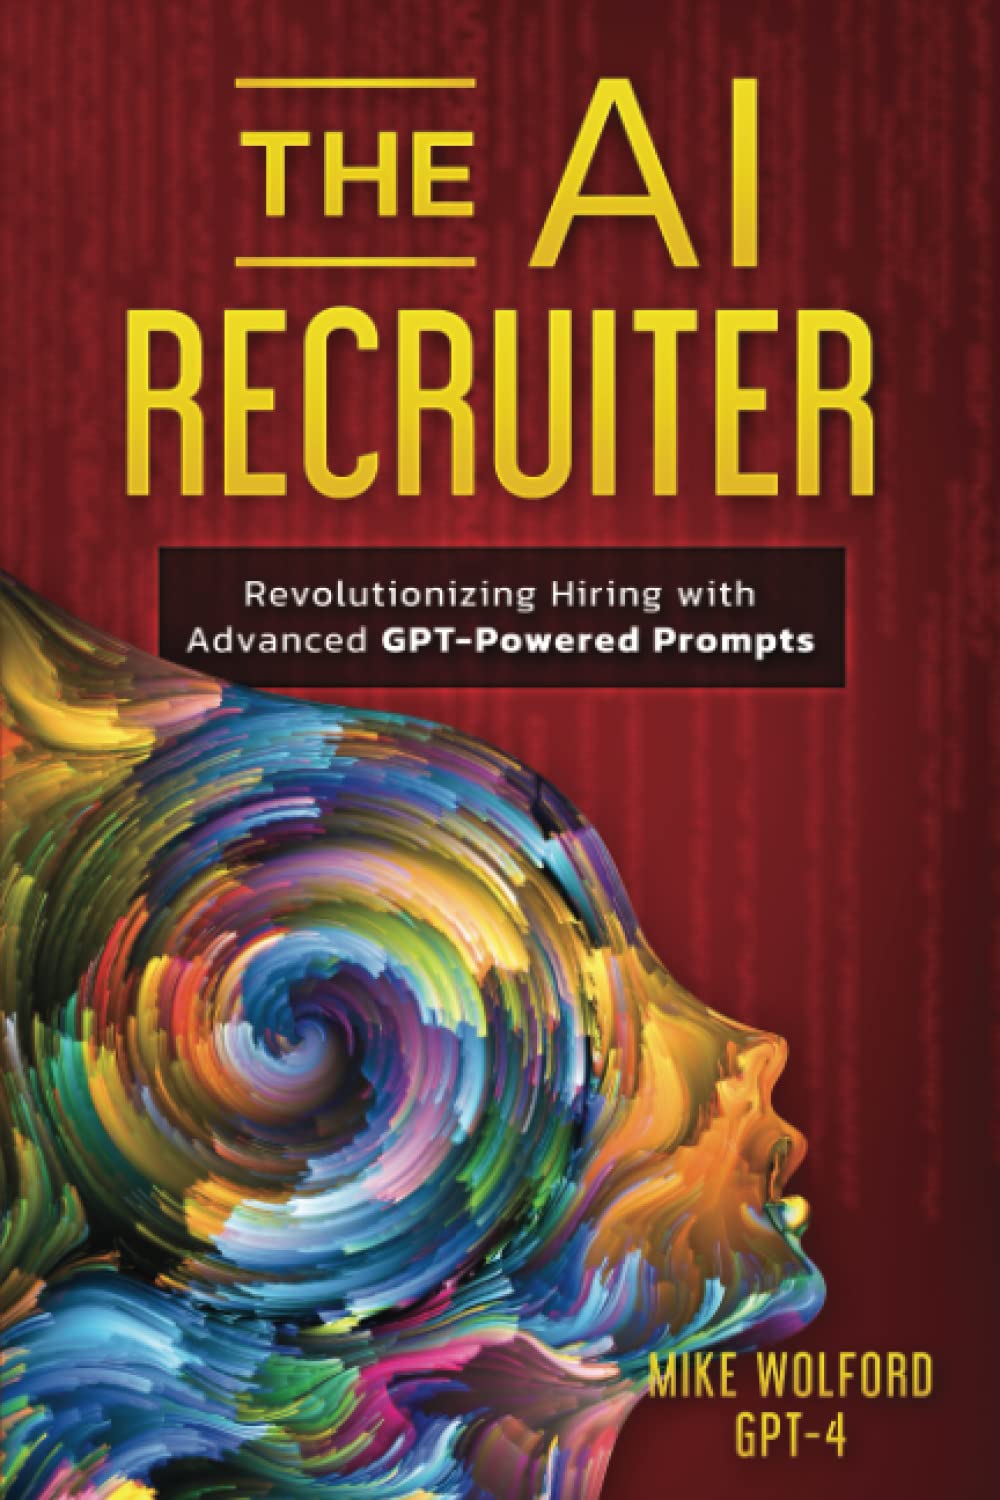 THE AI RECRUITER: Revolutionizing Hiring with Advanced GPT-Powered Prompts